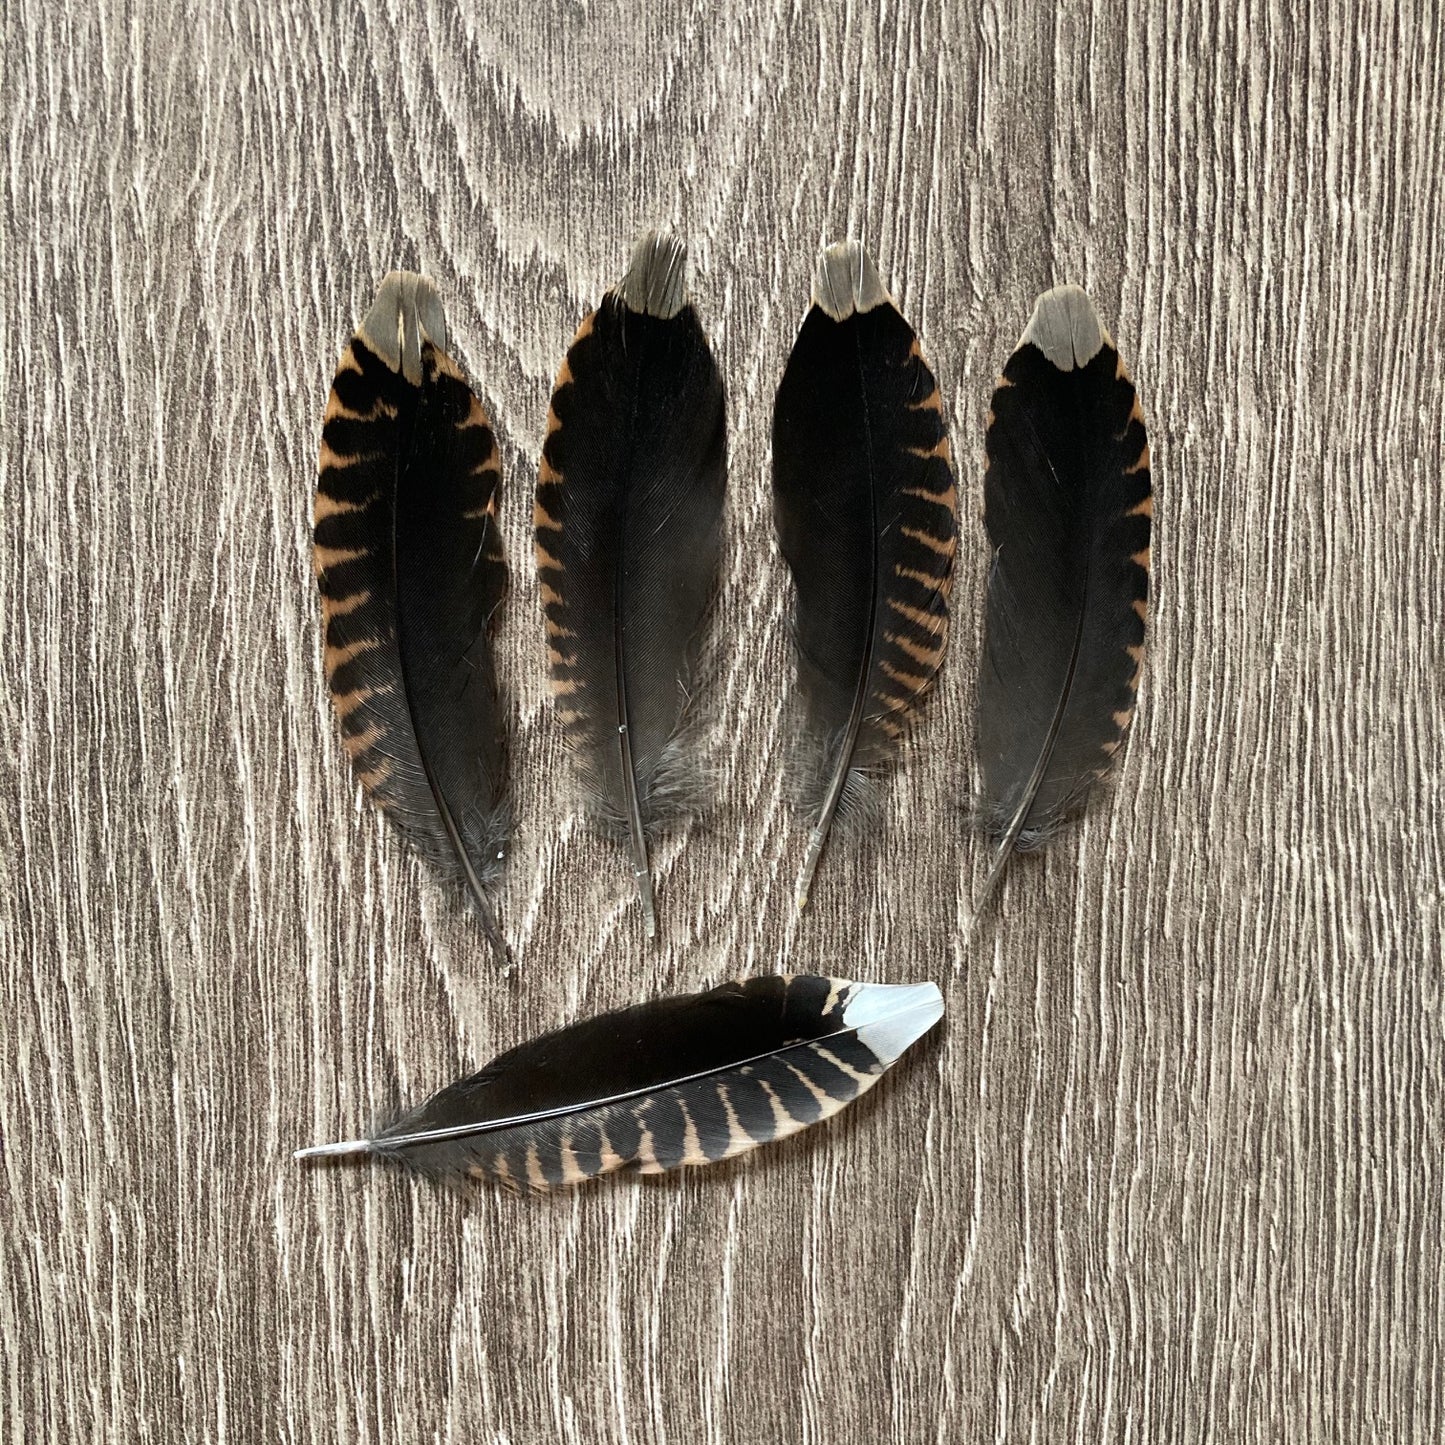 Woodcock Tail Feathers